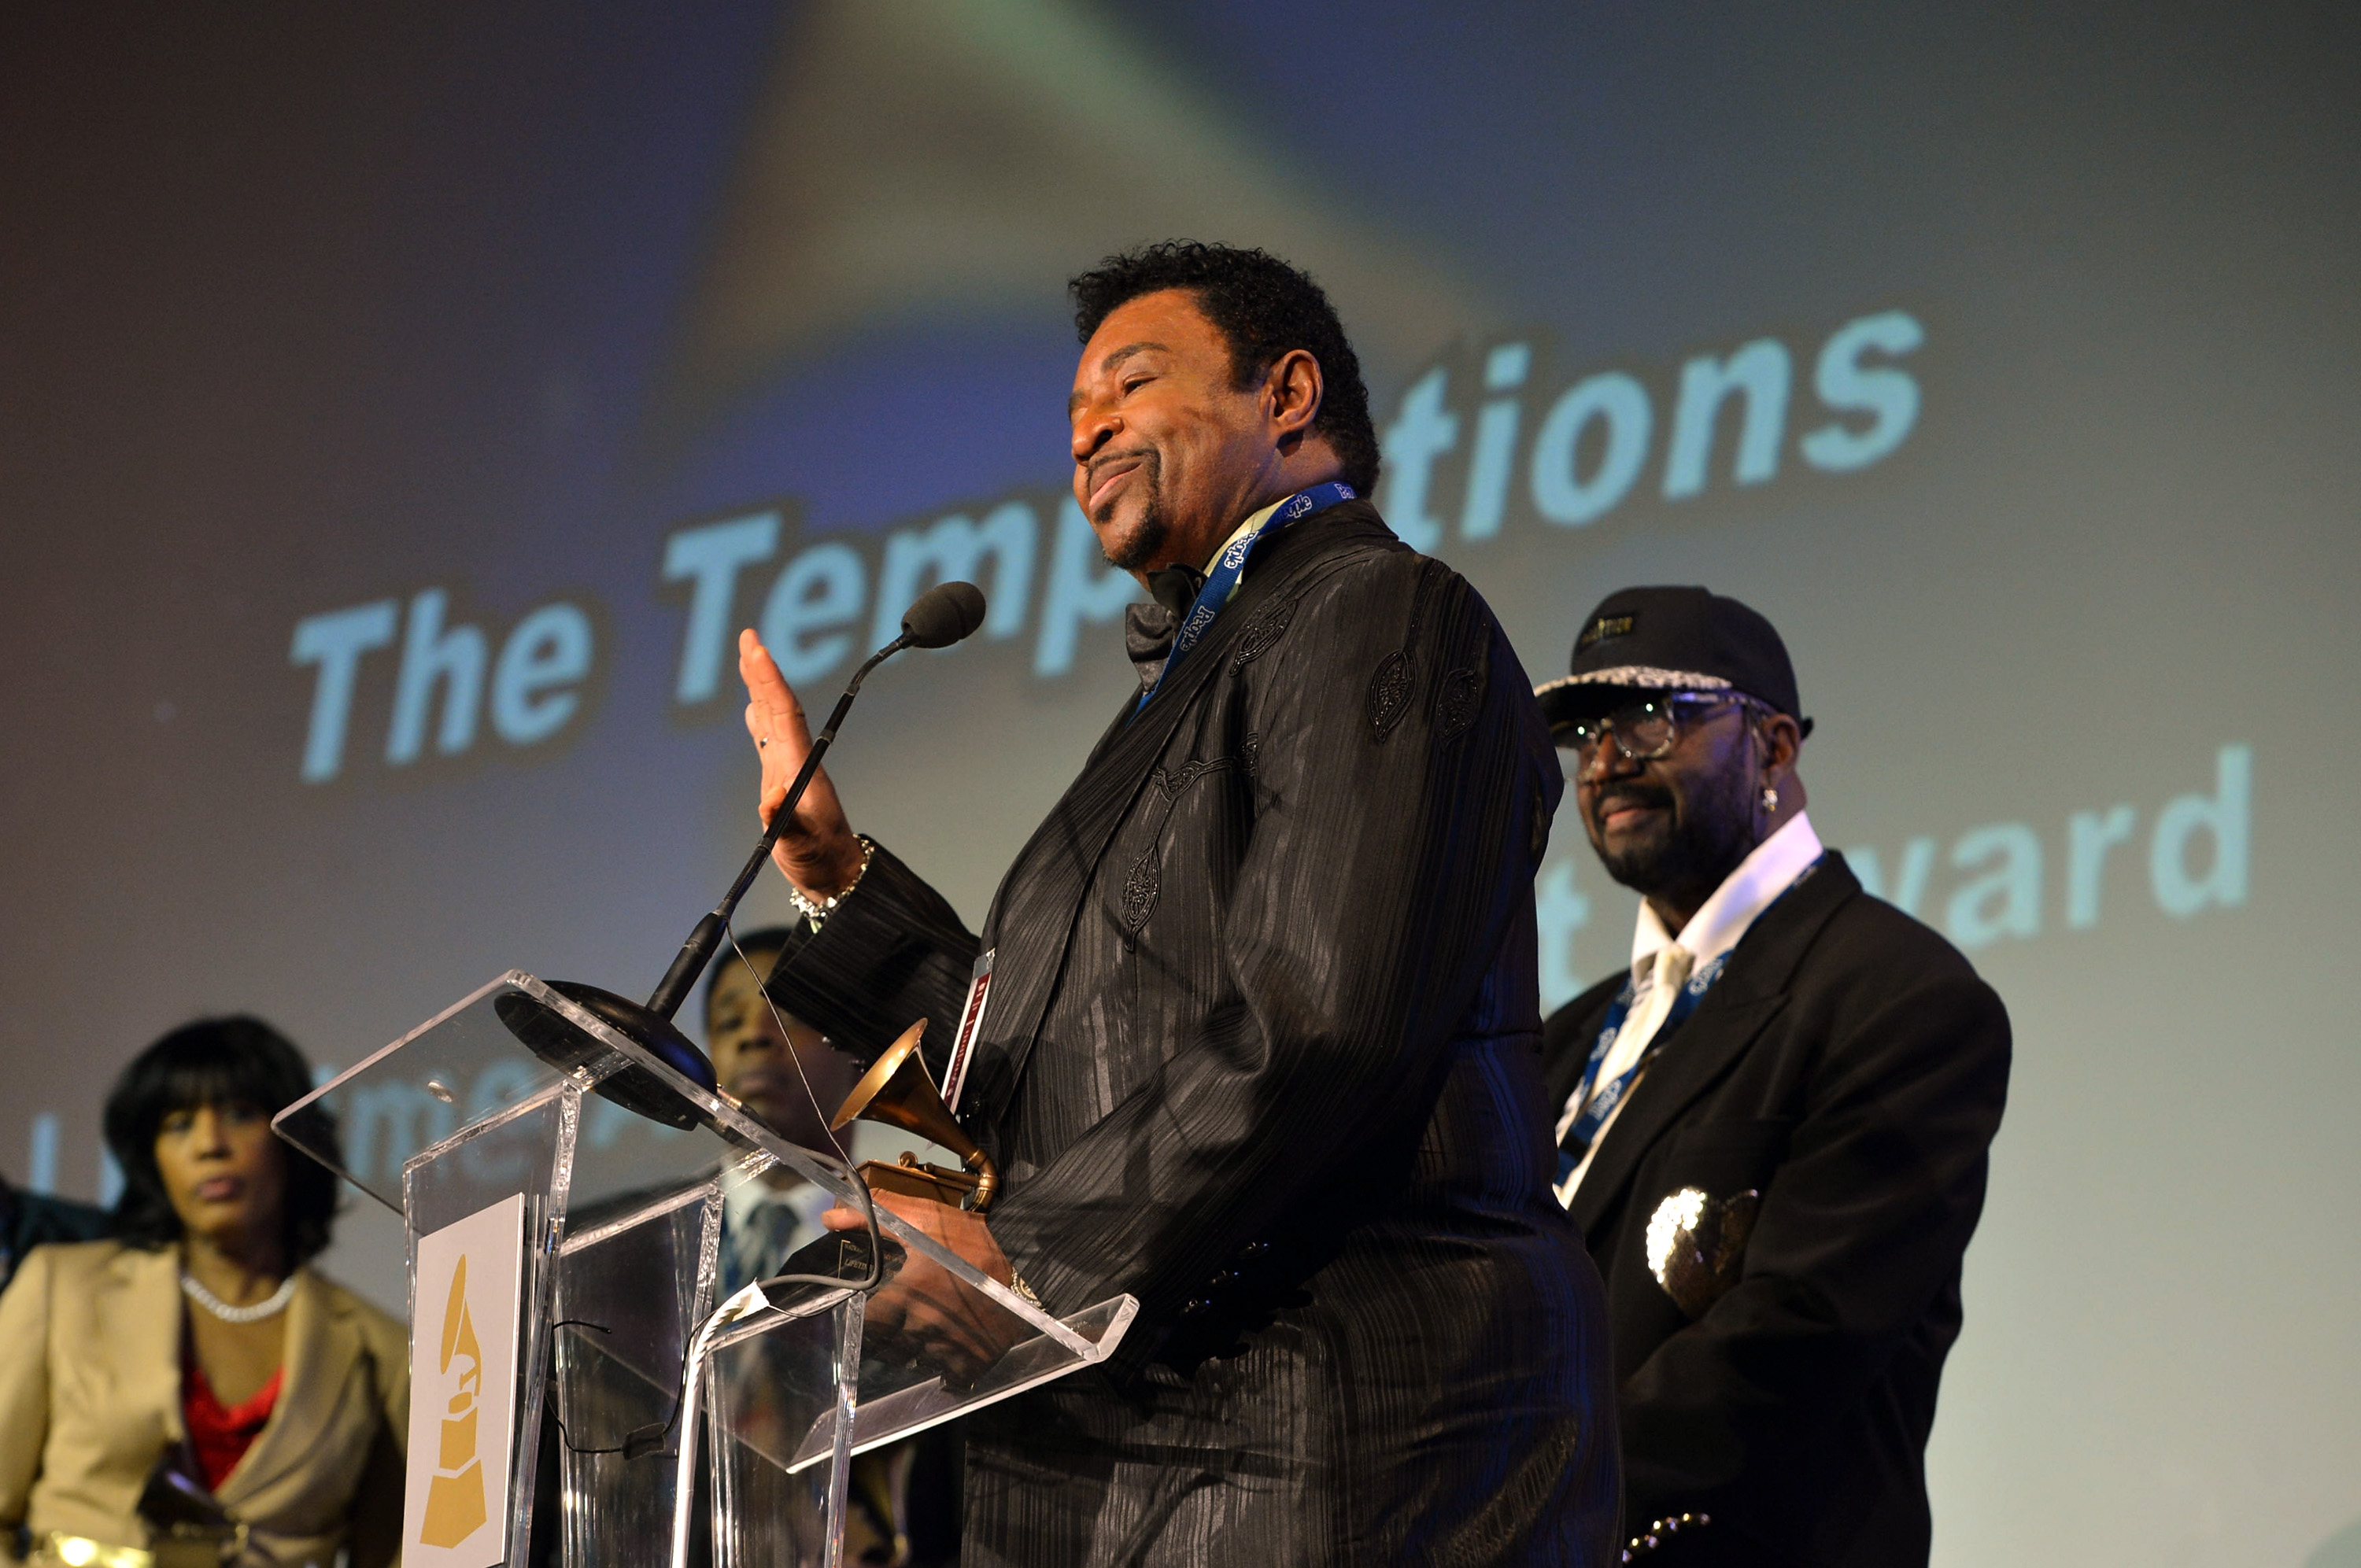 LOS ANGELES, CA - FEBRUARY 09: Singer Dennis Edwards of The Temptations speaks onstage during the Special Merit Awards Ceremony during the 55th Annual GRAMMY Awards at the Wilshire Ebell Theater on February 9, 2013 in Los Angeles, California. (Photo by Rick Diamond/WireImage) (Rick Diamond—WireImage)